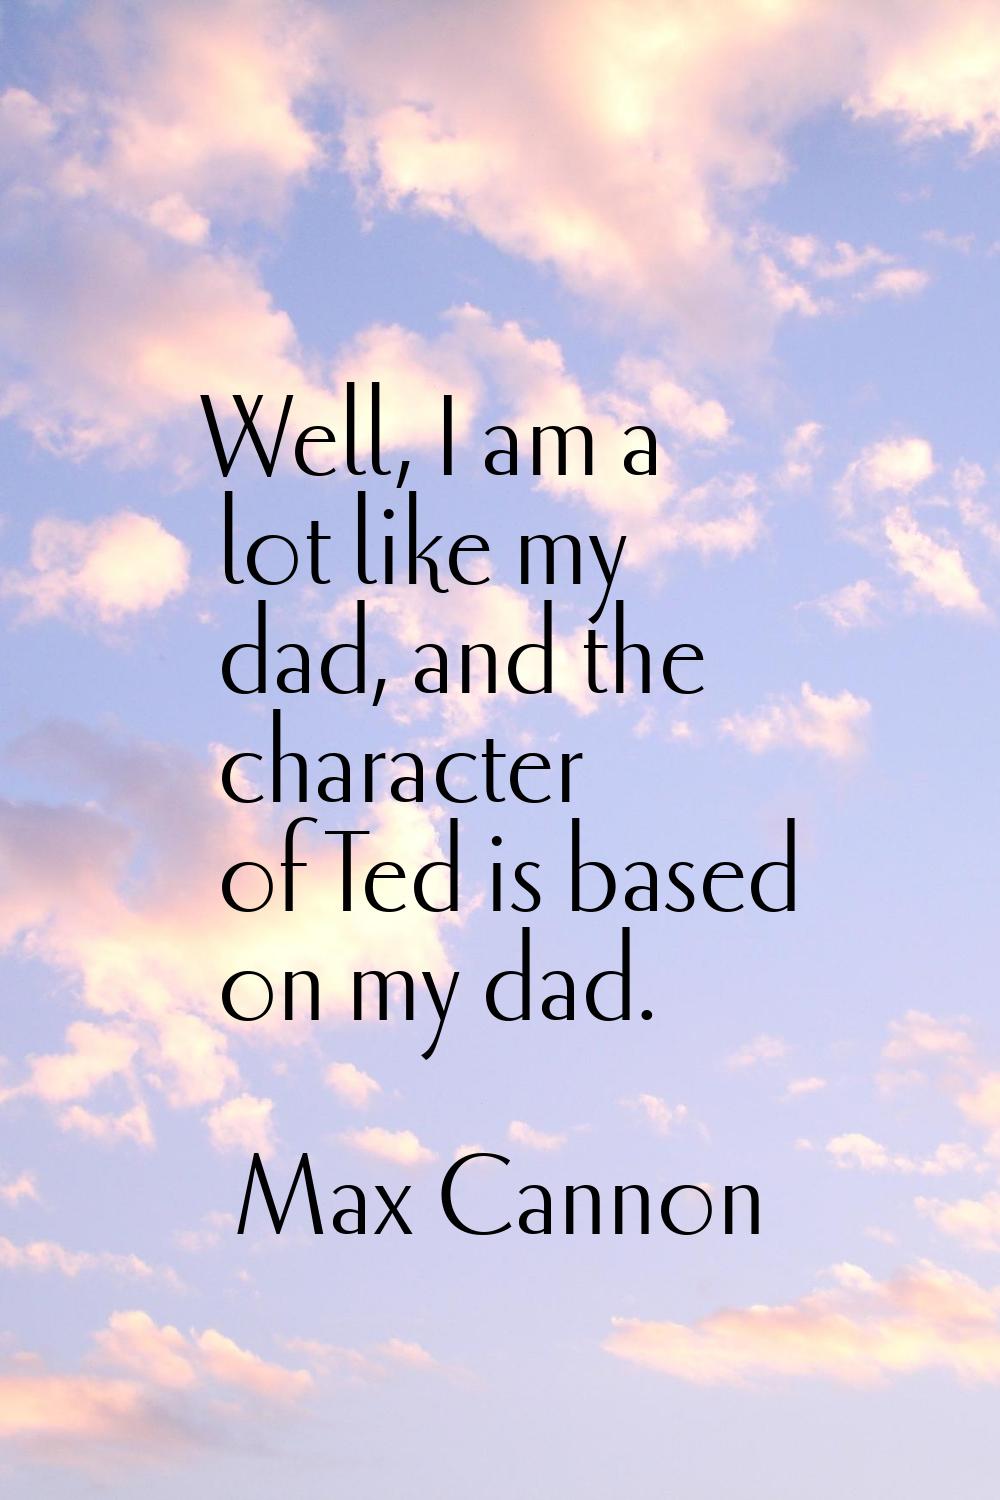 Well, I am a lot like my dad, and the character of Ted is based on my dad.